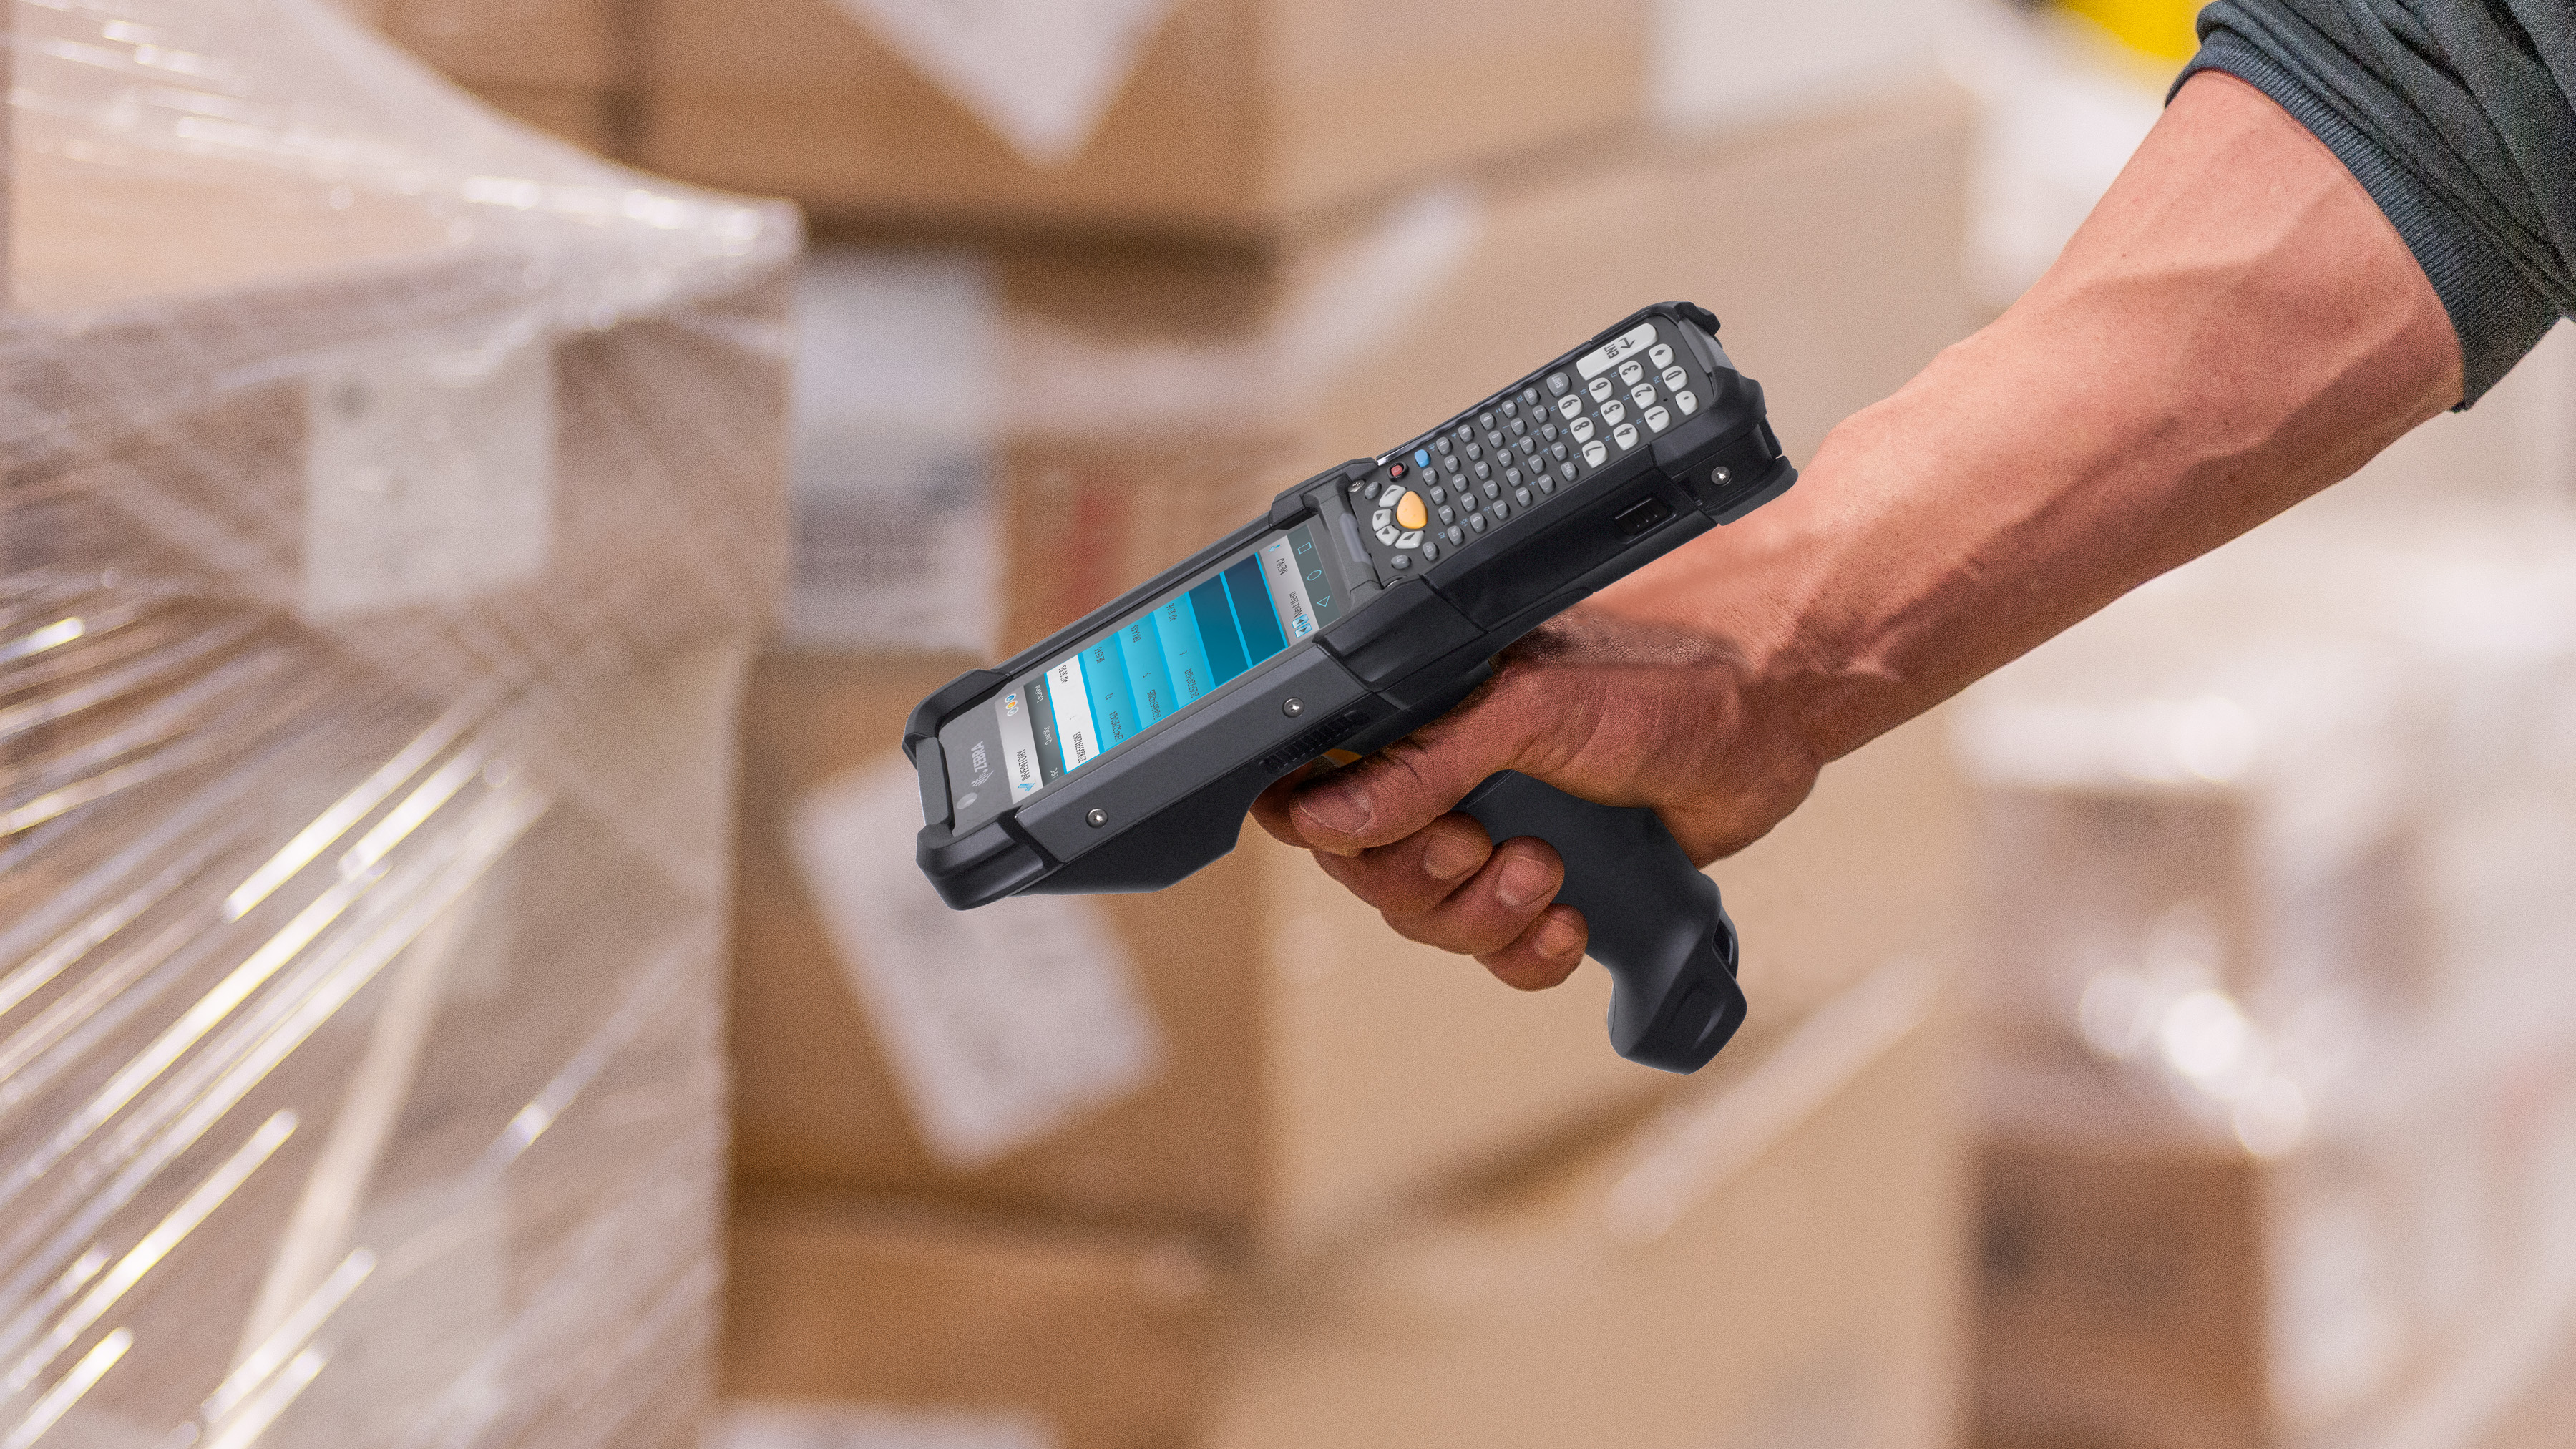 Worker uses a handheld Zebra mobile computer to scan barcodes on cardboard boxes